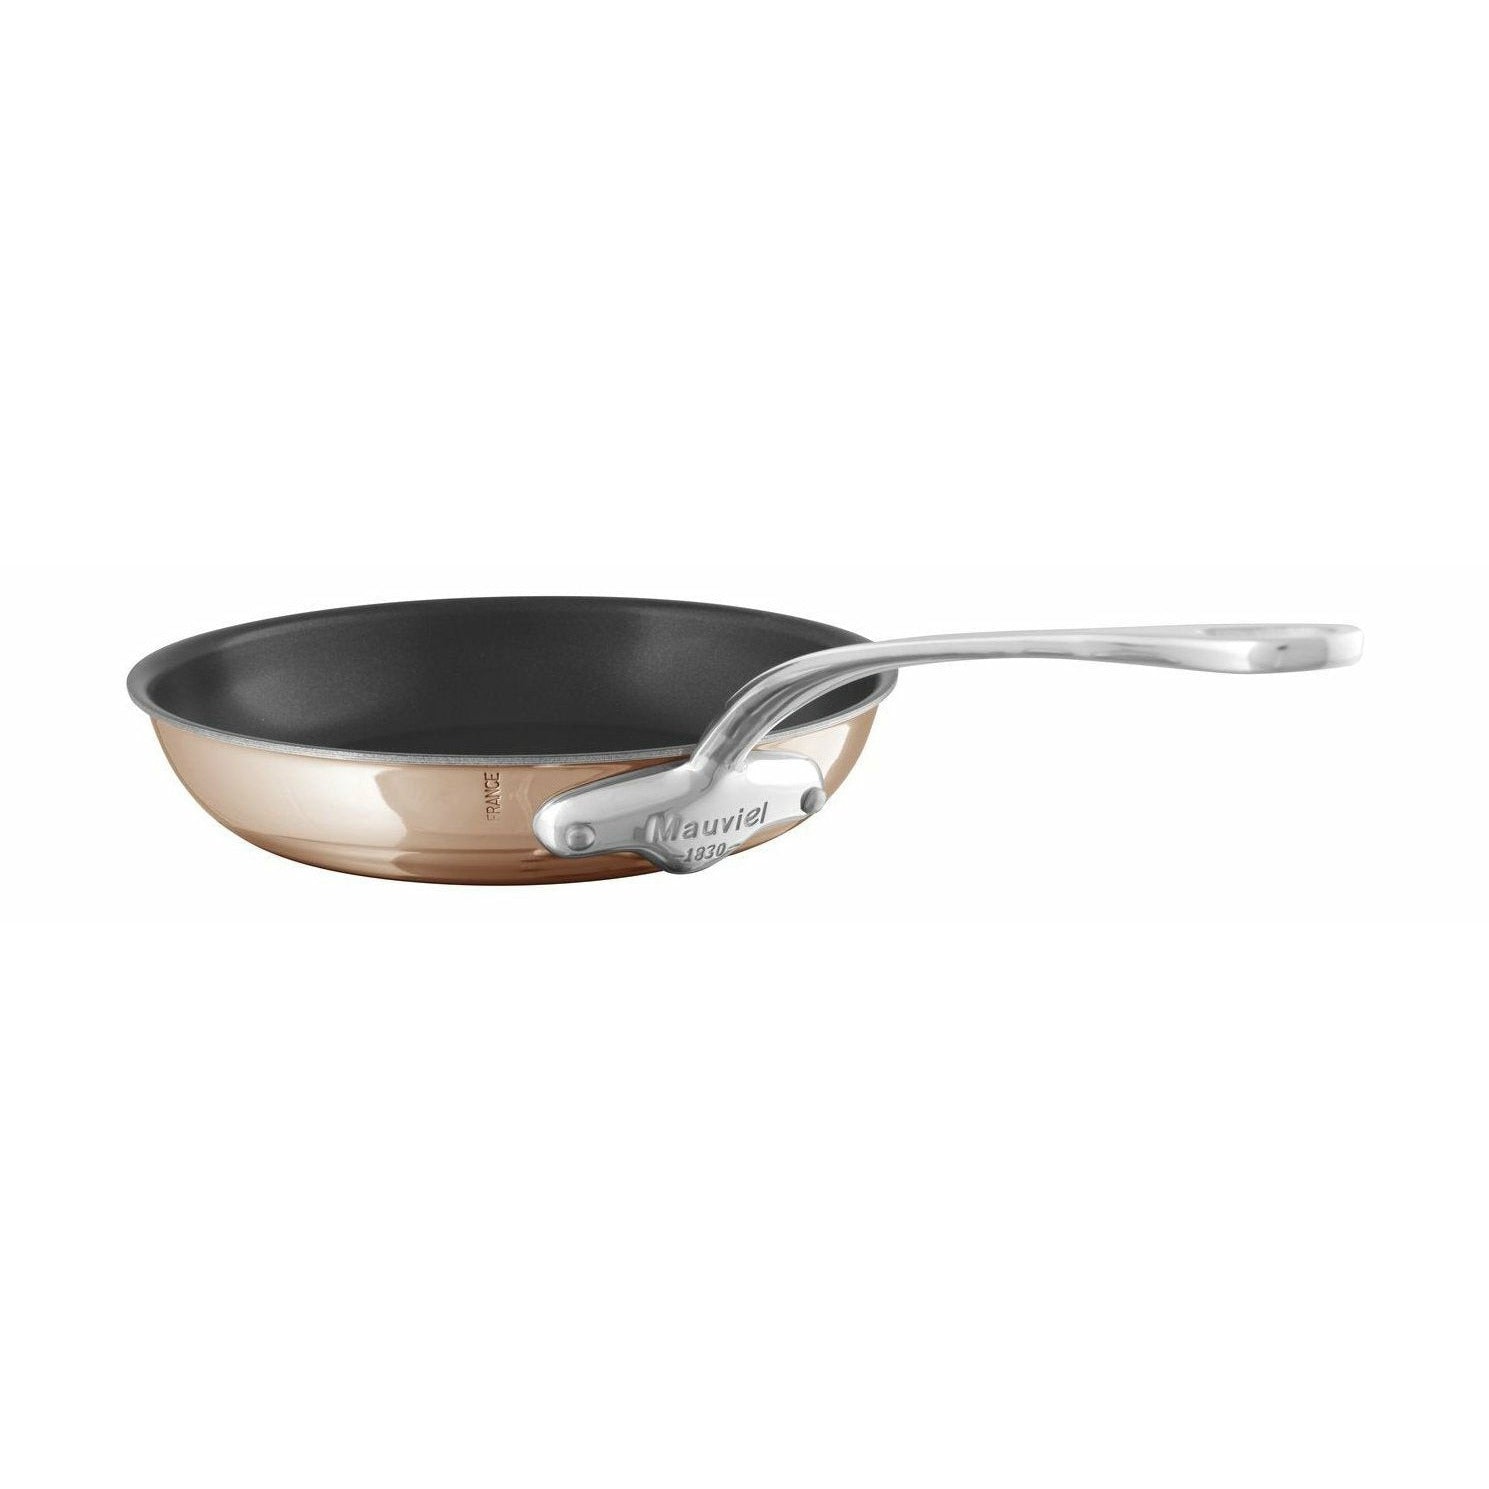 Mauviel M"6s Frying Pan Non Stick Copper/Stainless Steel, ø 26 Cm